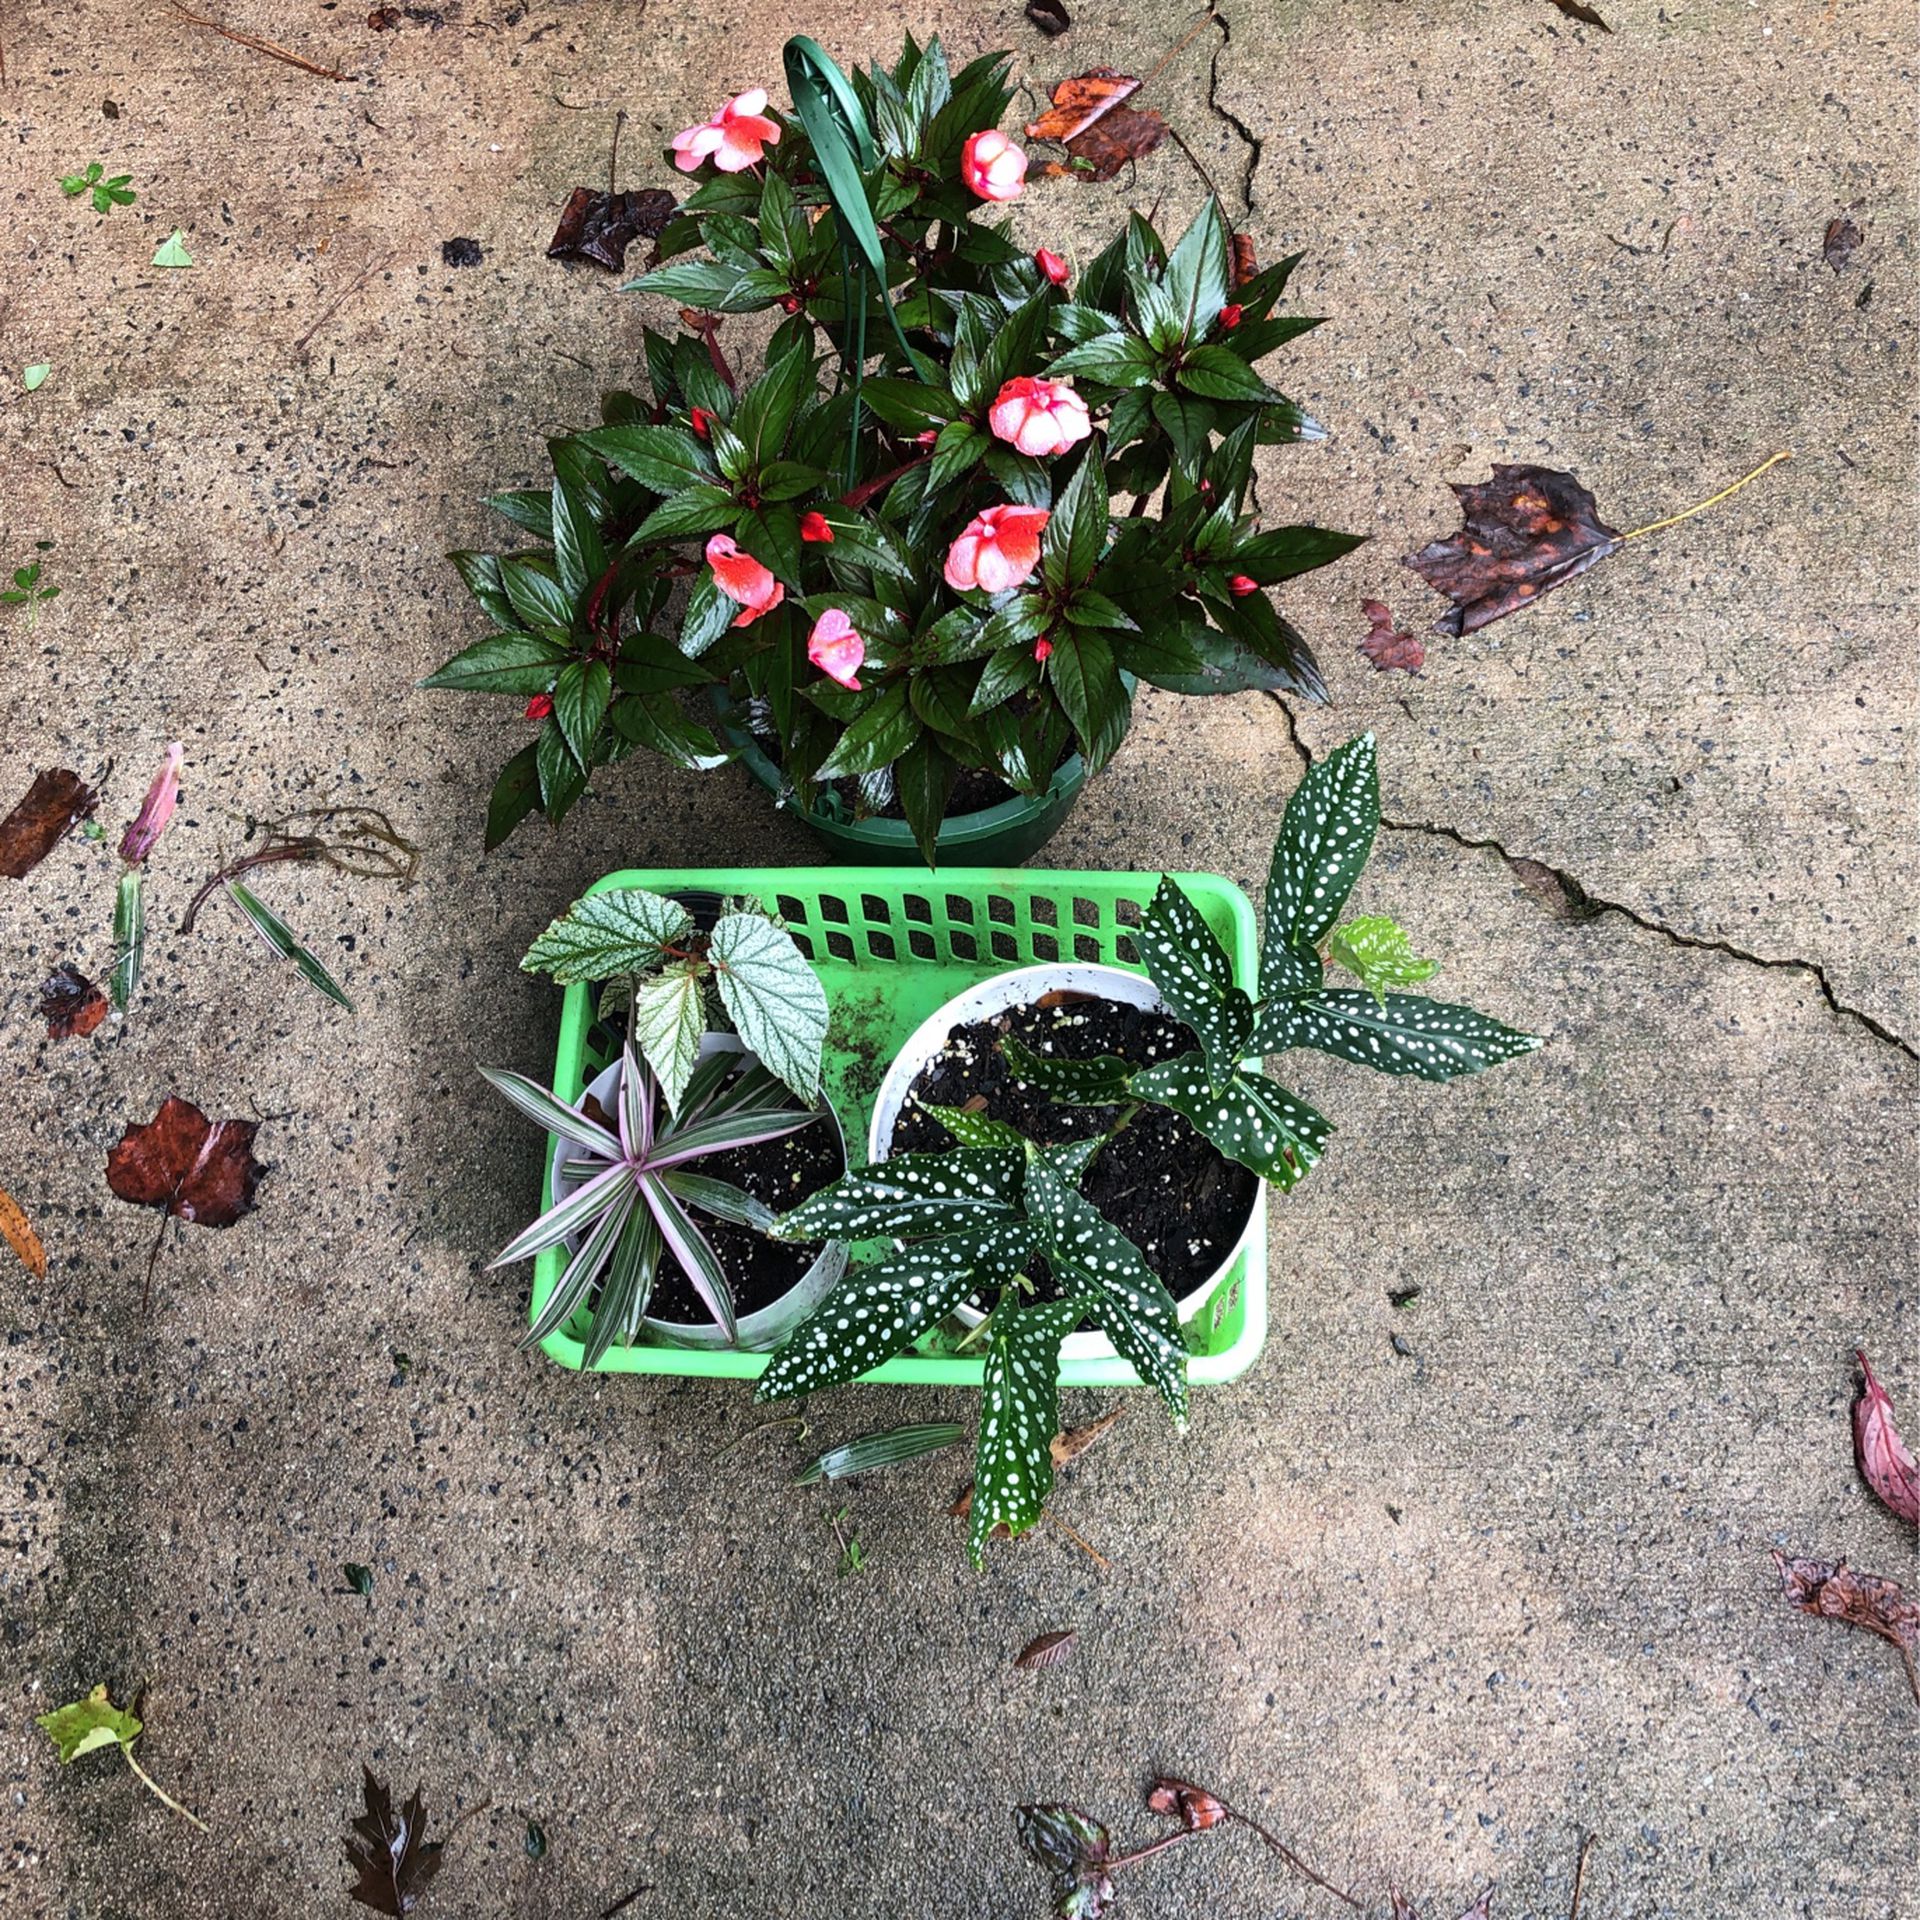 $20.00 For The Whole Bundle Of Plants 